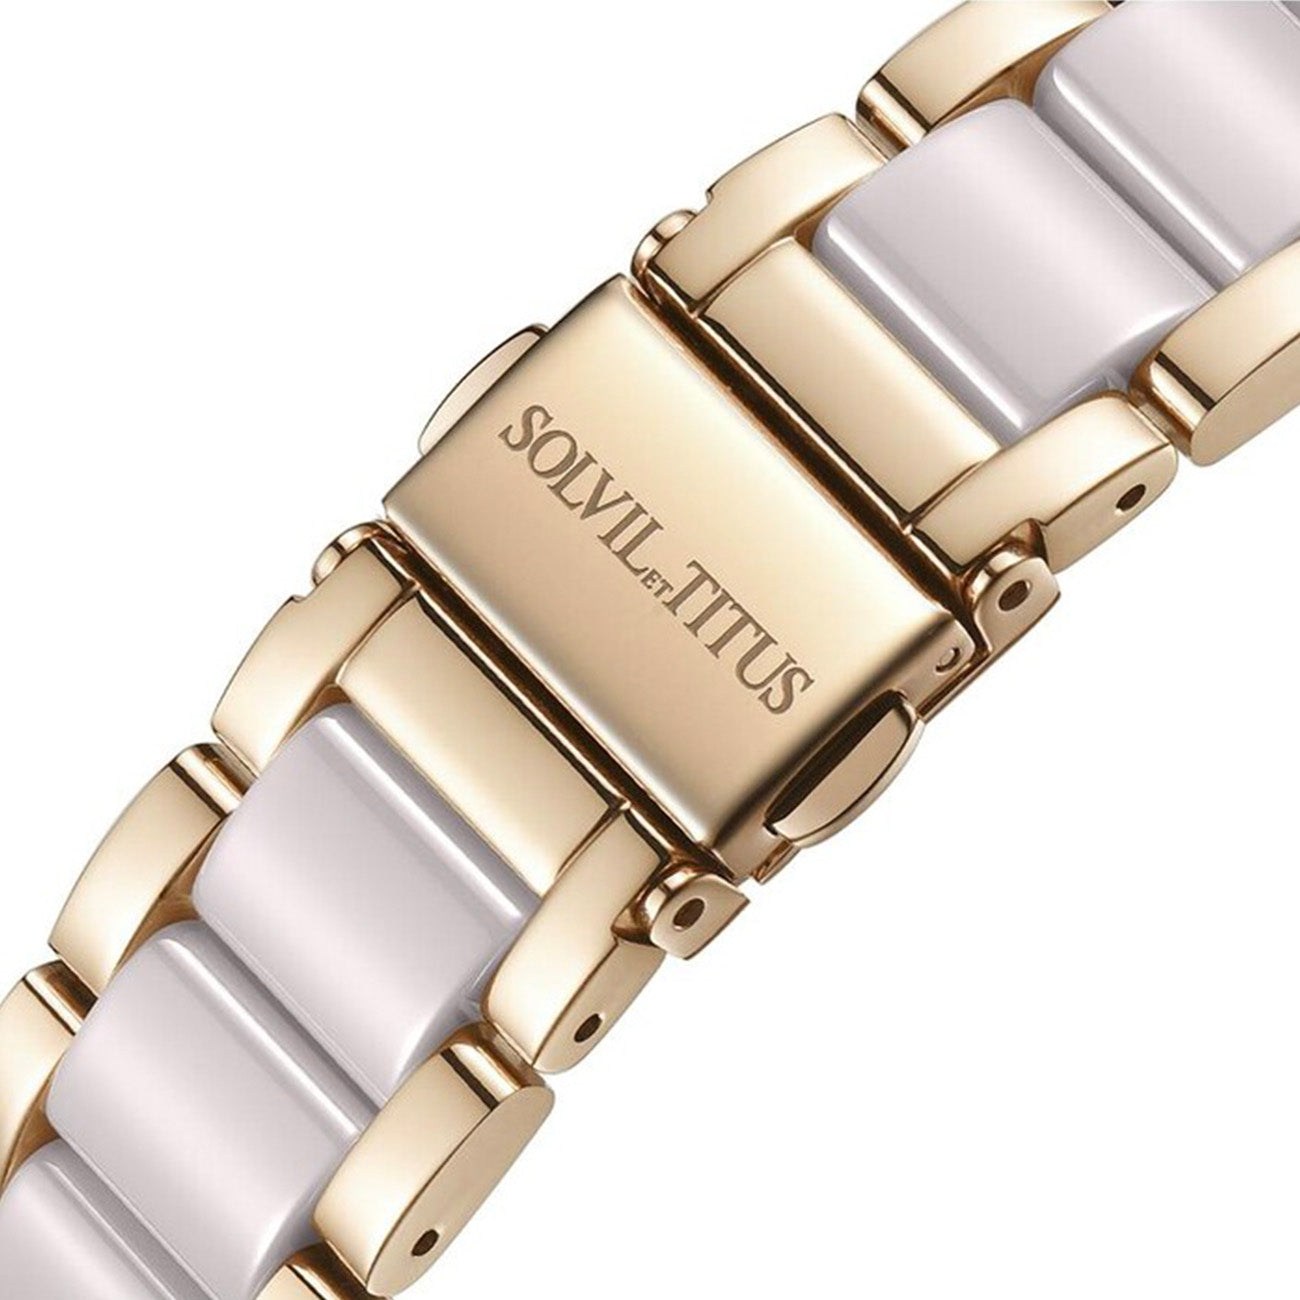 Perse Multi-Function Quartz Stainless Steel with Ceramic Women Watch W06-02108-011